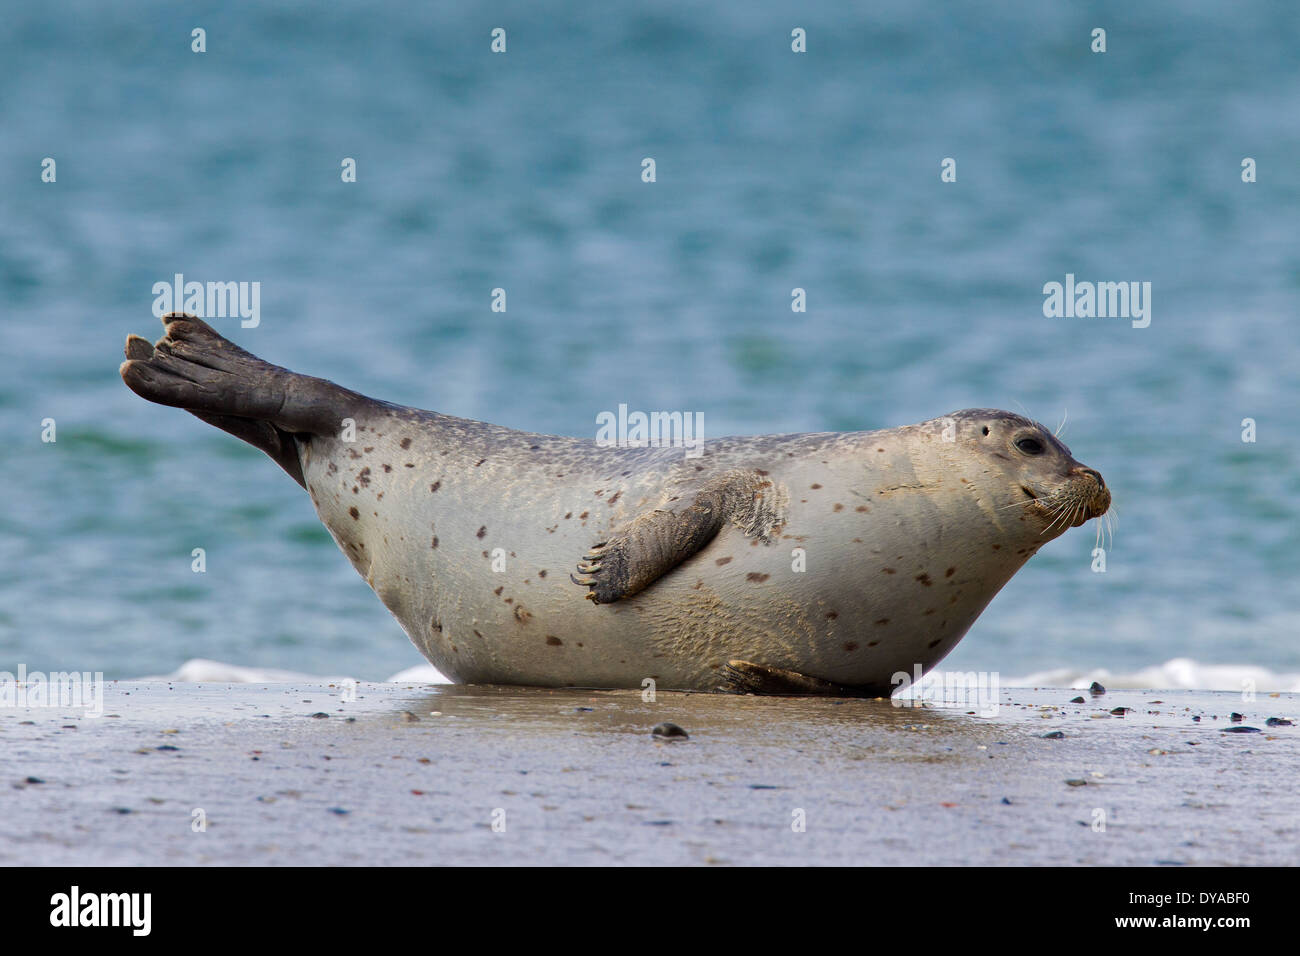 Common seal / harbor seal / harbour seal (Phoca vitulina) resting on the beach Stock Photo